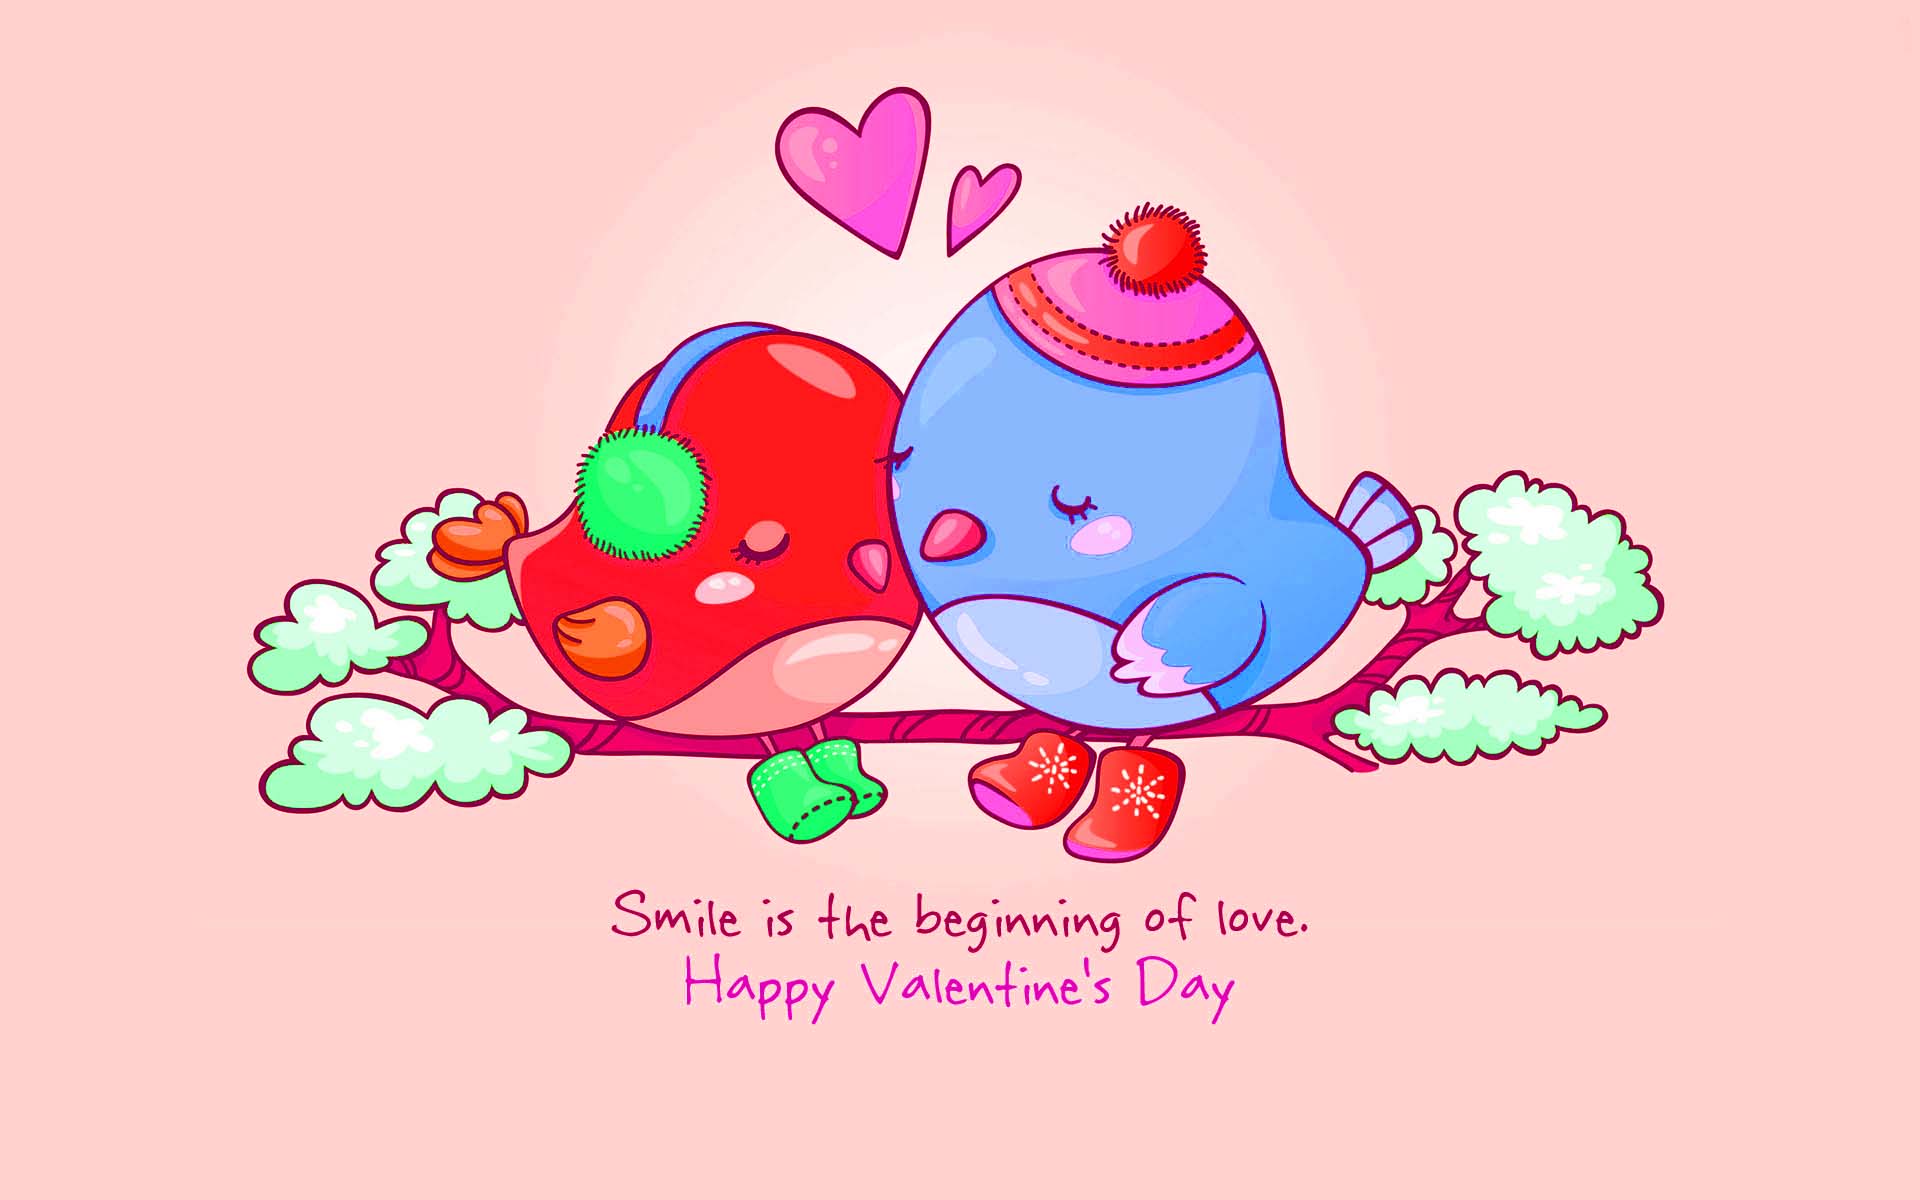 Happy Valentine Day Image To Share. Download Valentines Day Picture